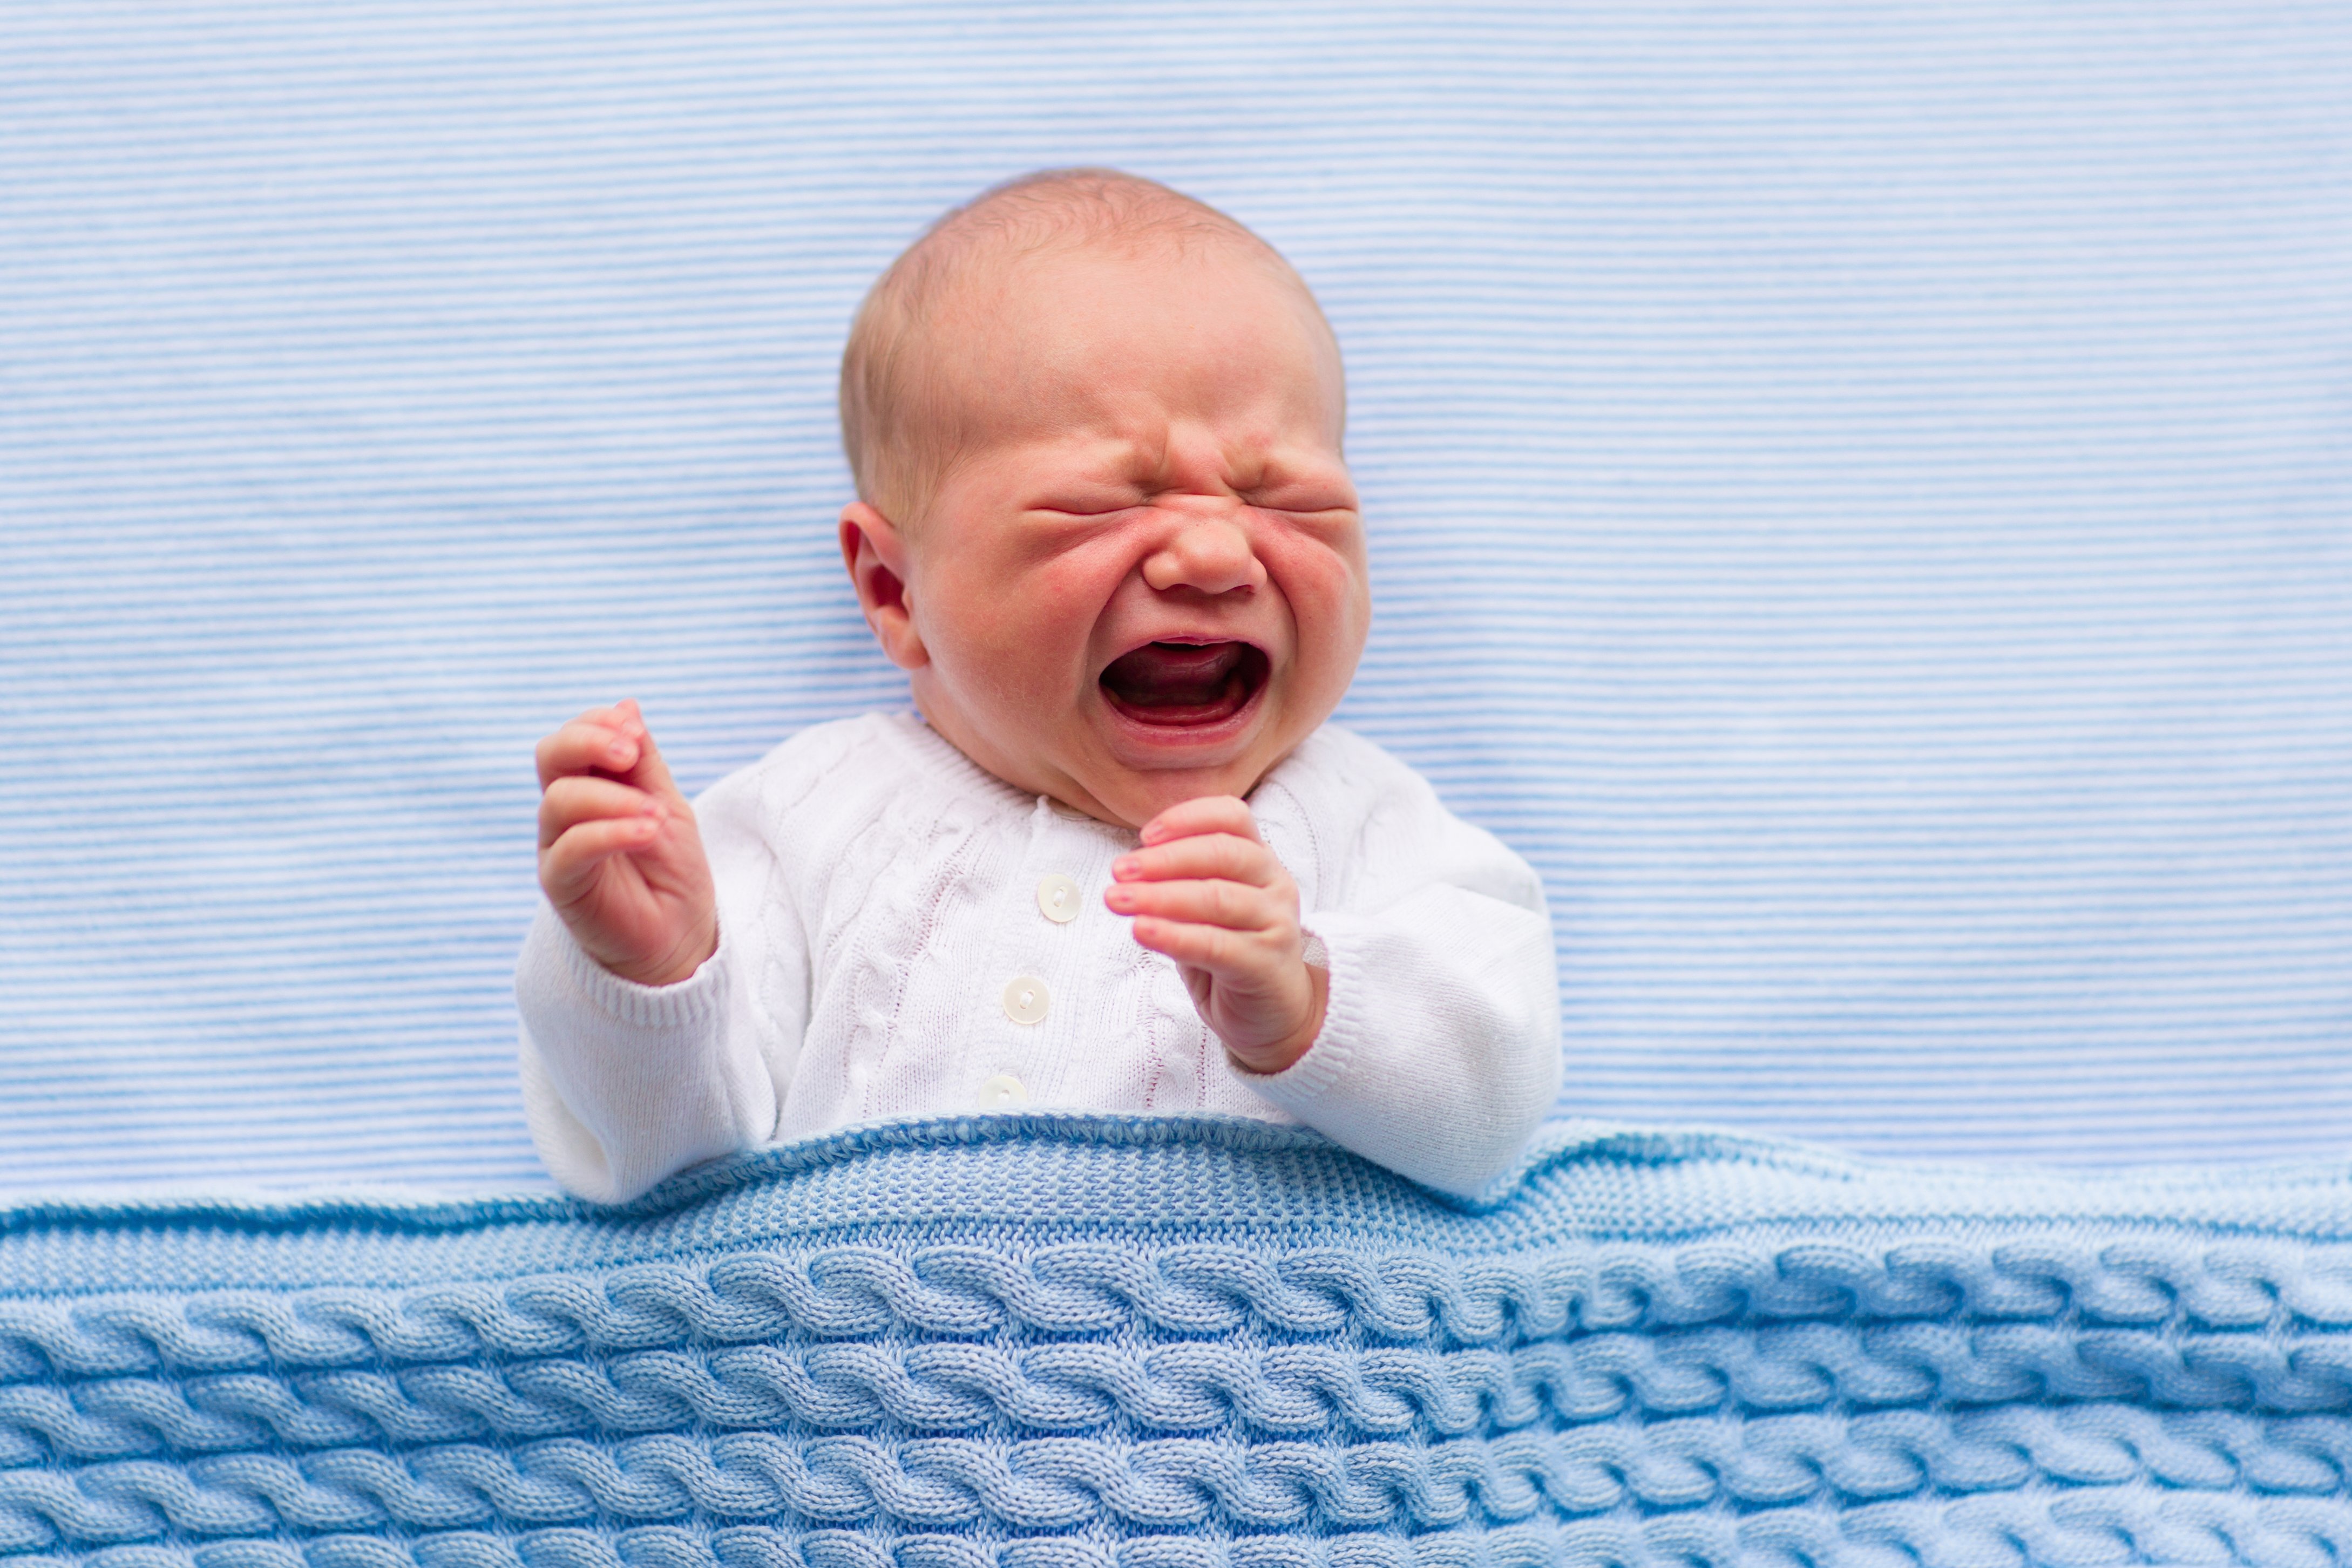 A crying baby under a blue blanket. | Photo: Shutterstock